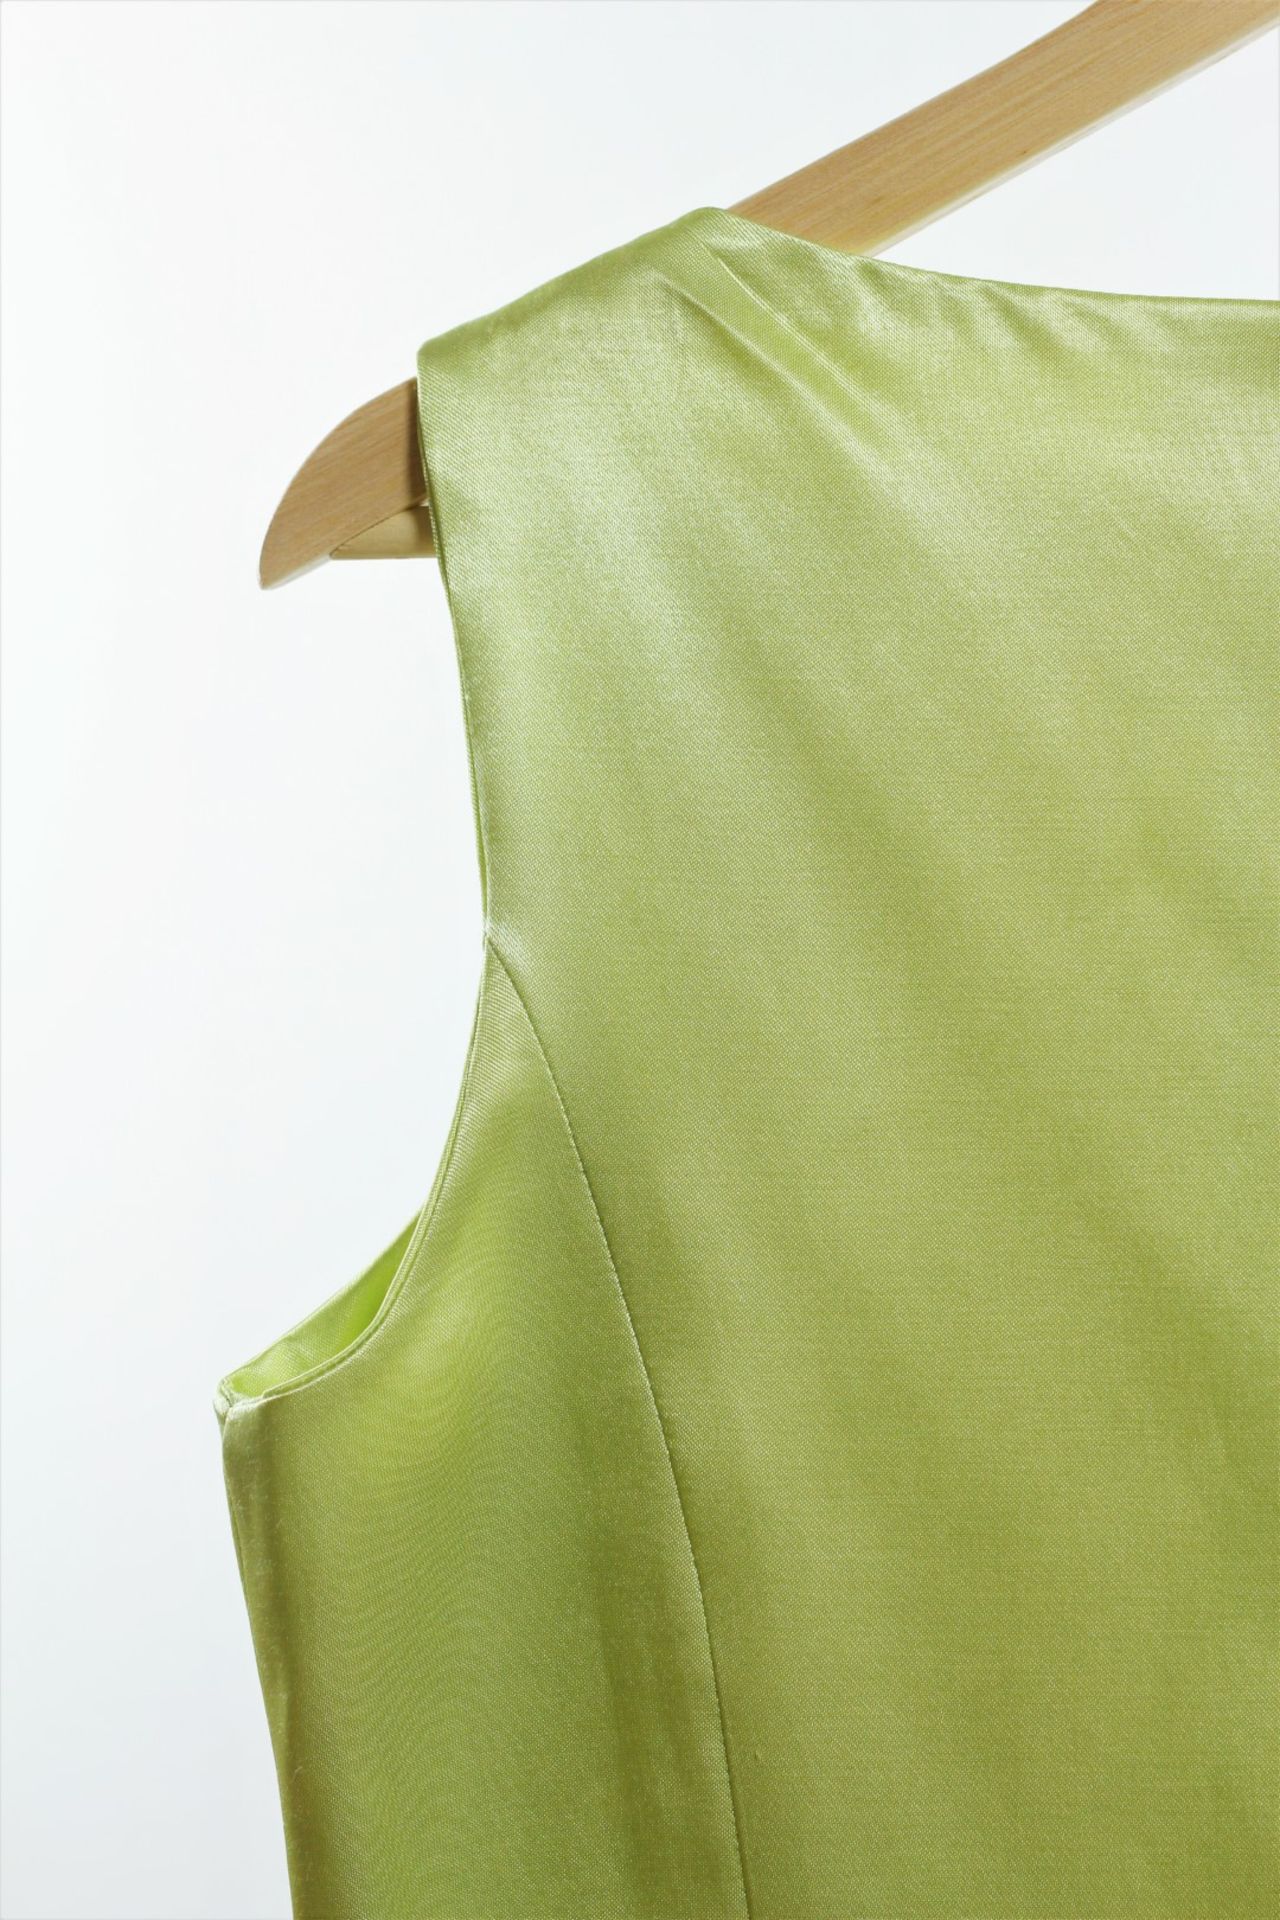 1 x Boutique Le Duc Lime Green Vest - From a High End Clothing Boutique In The - Image 6 of 9